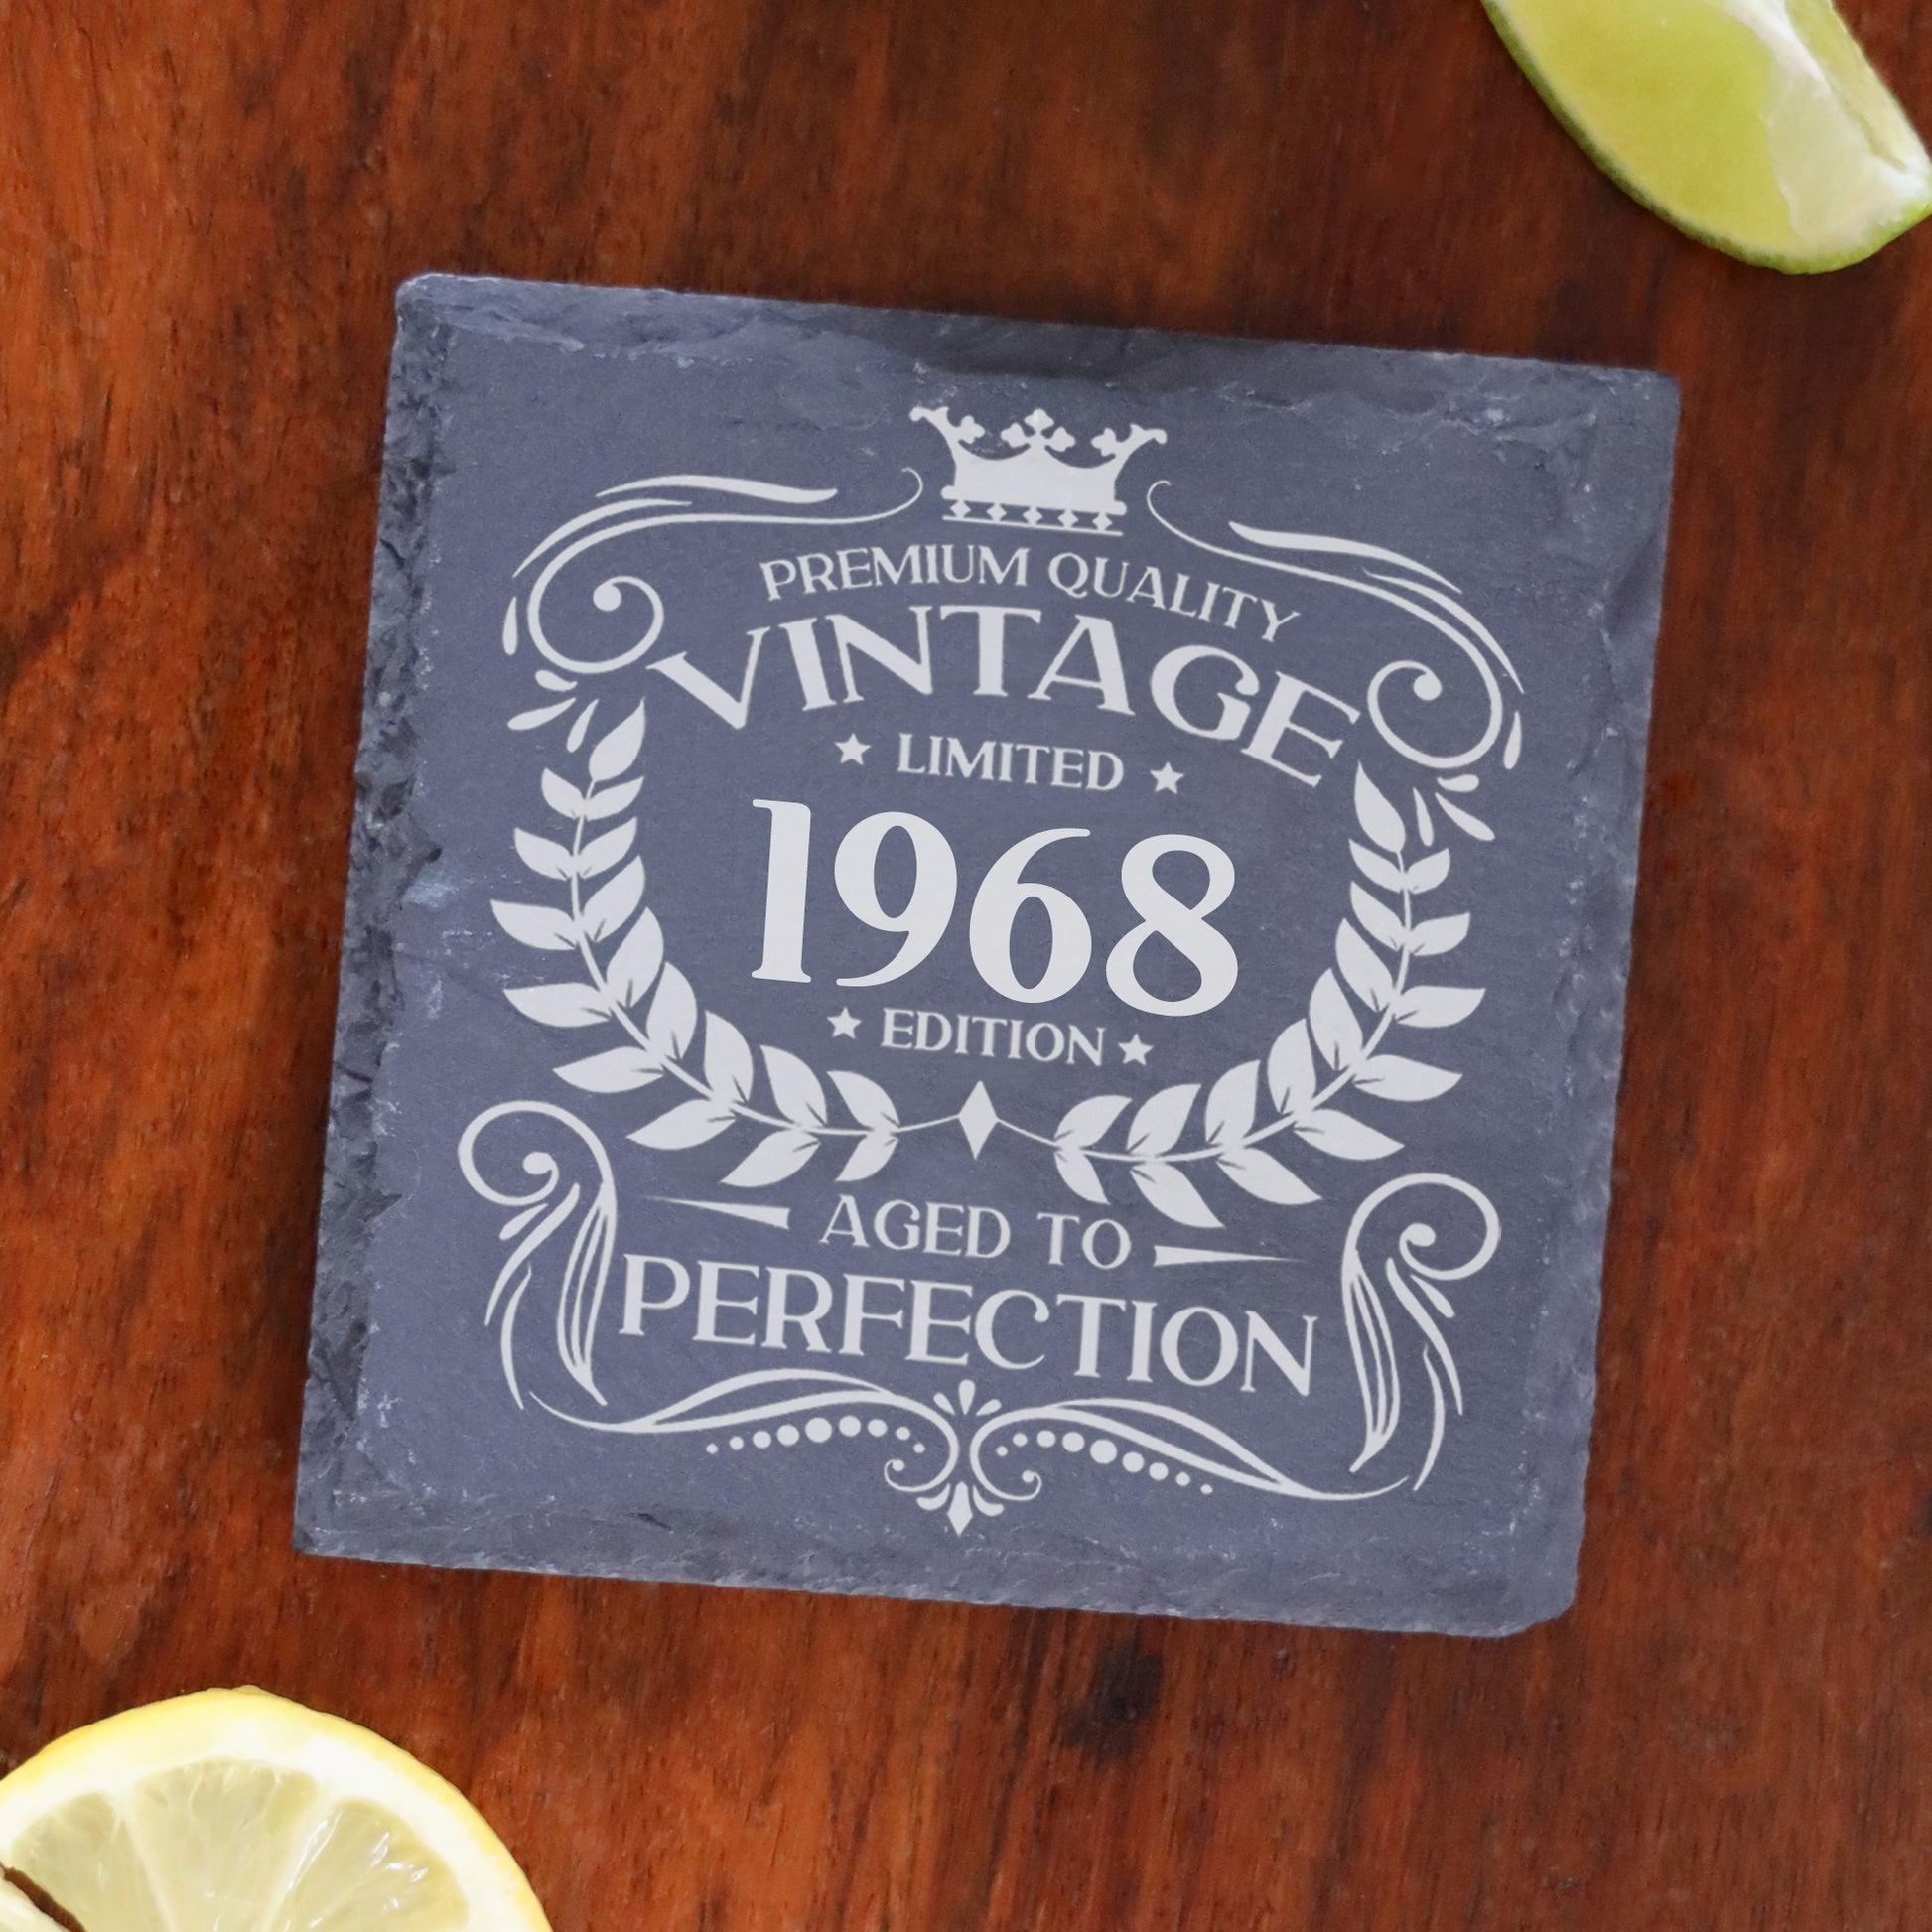 Personalised Vintage 1968 Mug and/or Coaster  - Always Looking Good - Square Coaster On Its Own  